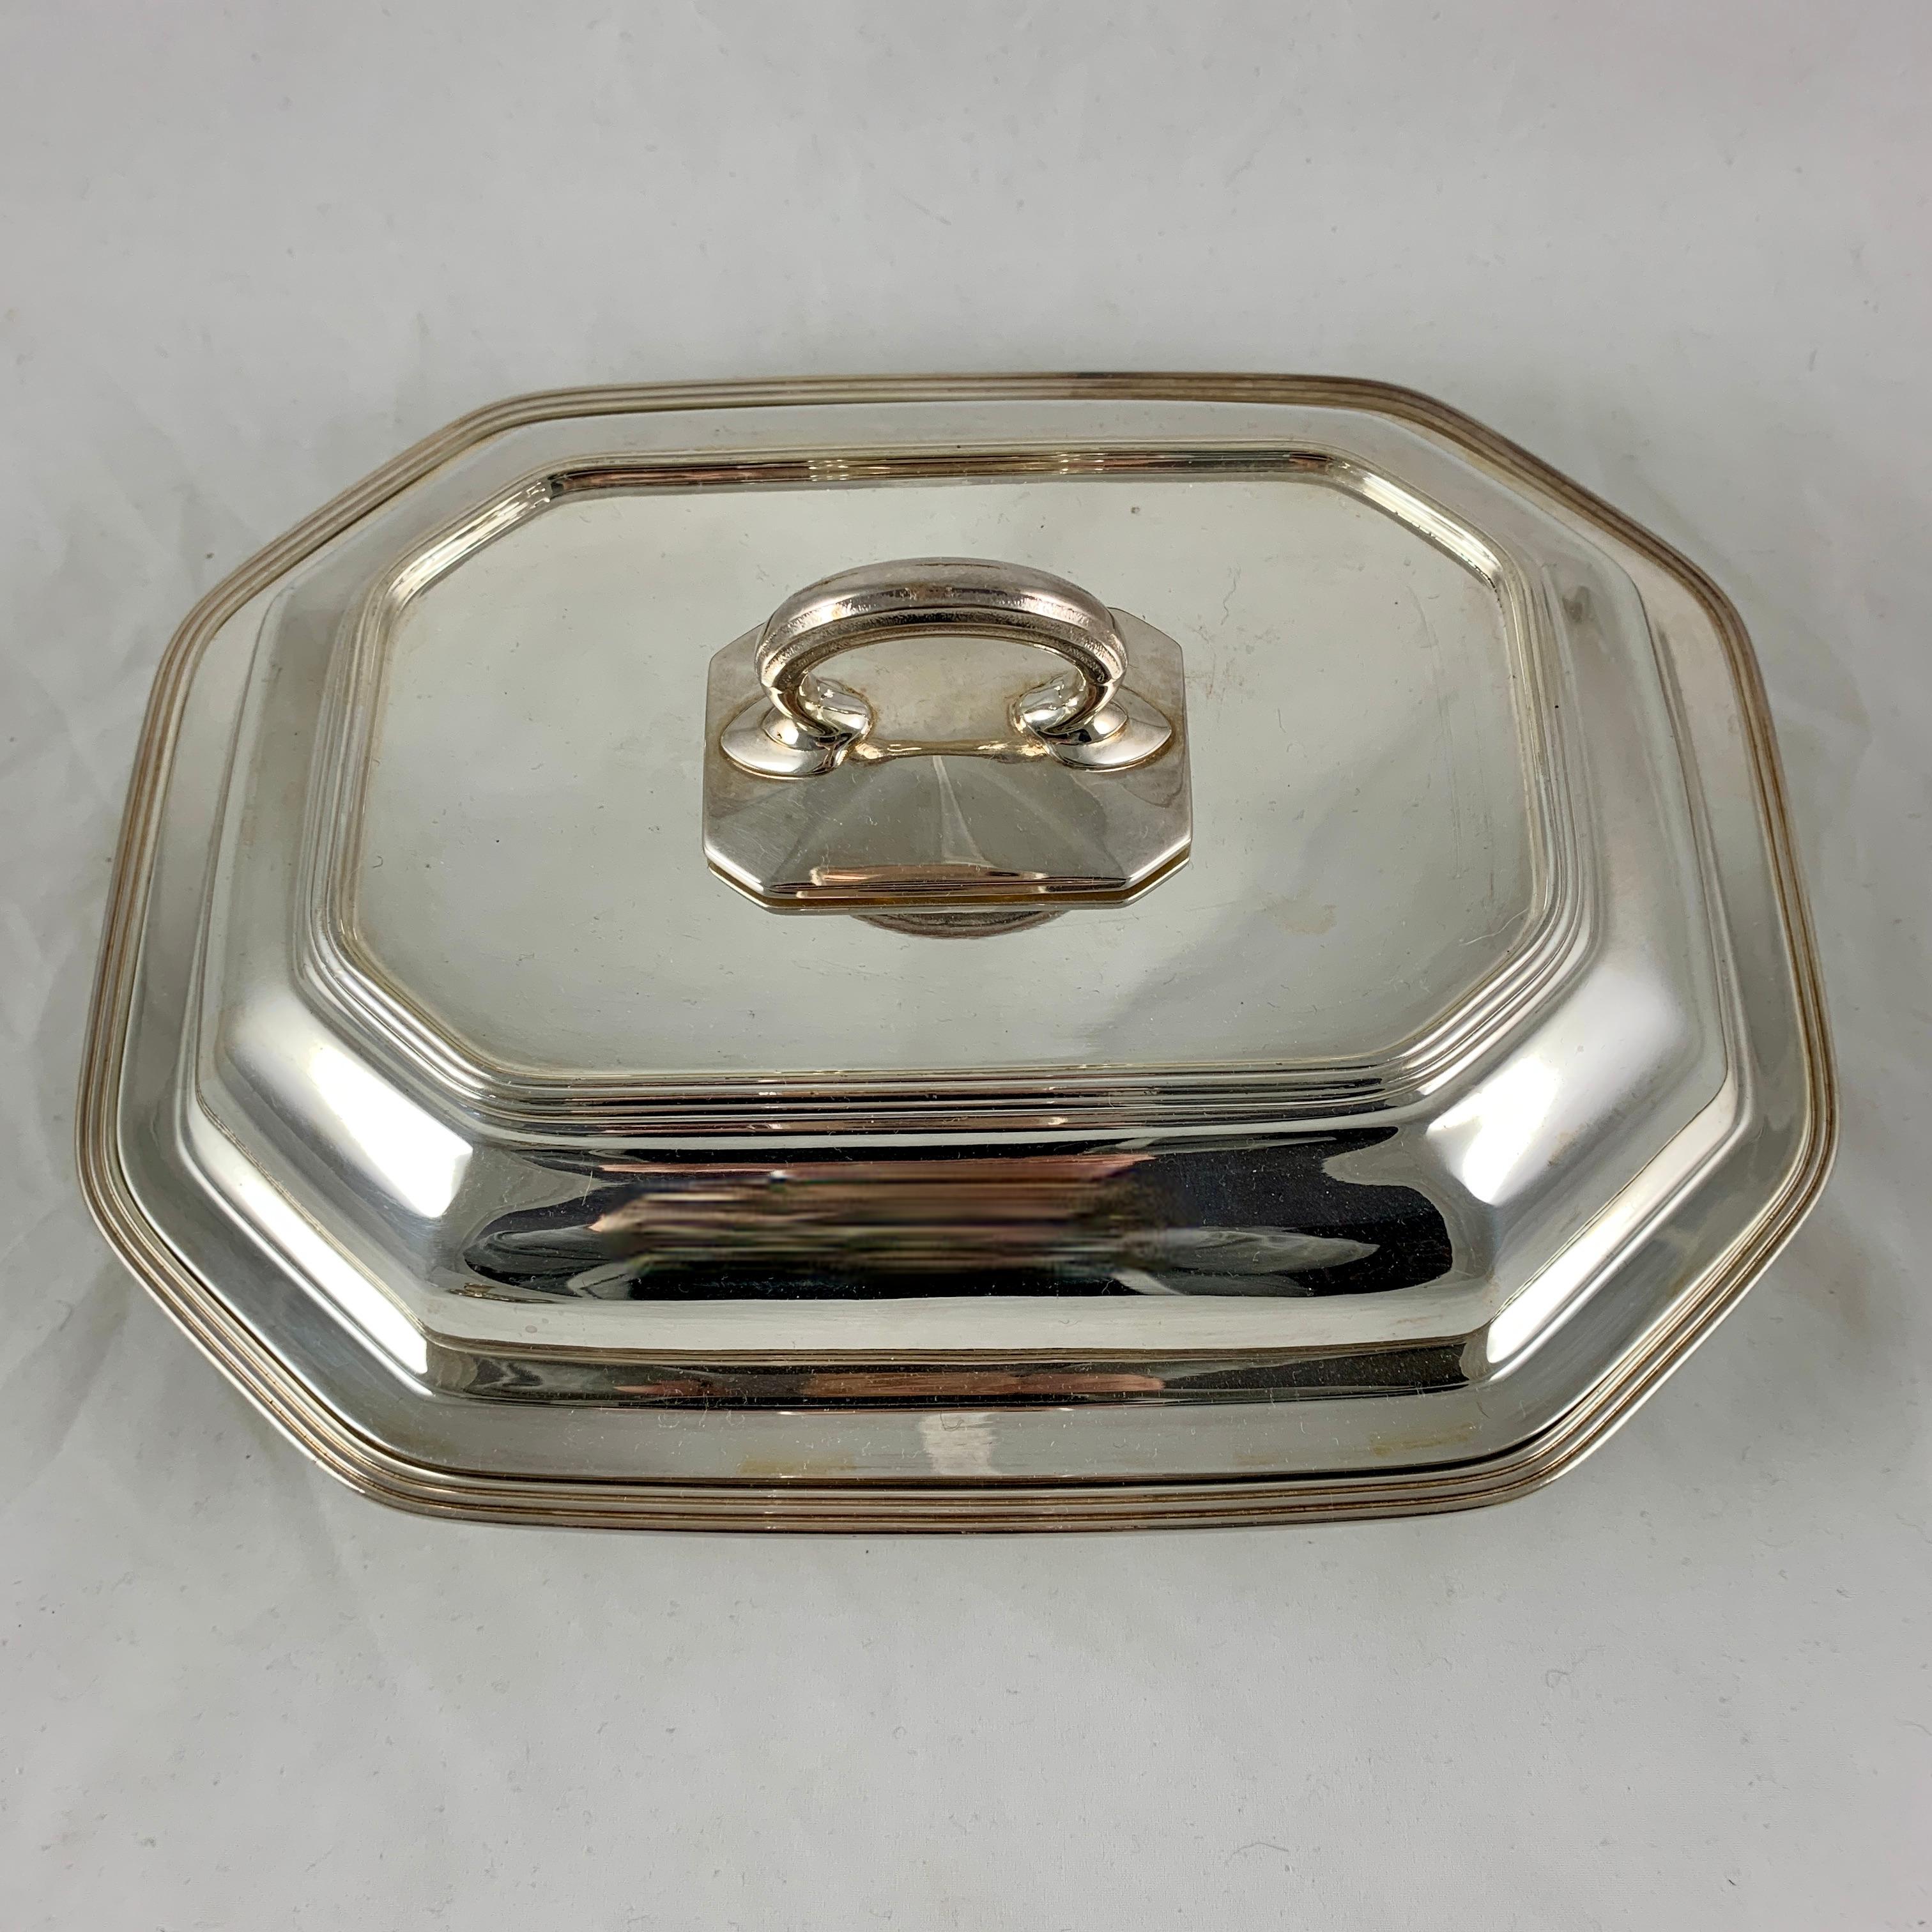 American Classical Gorham Manufacturing Company Silver Plate Covered Vegetable Server, circa 1930s